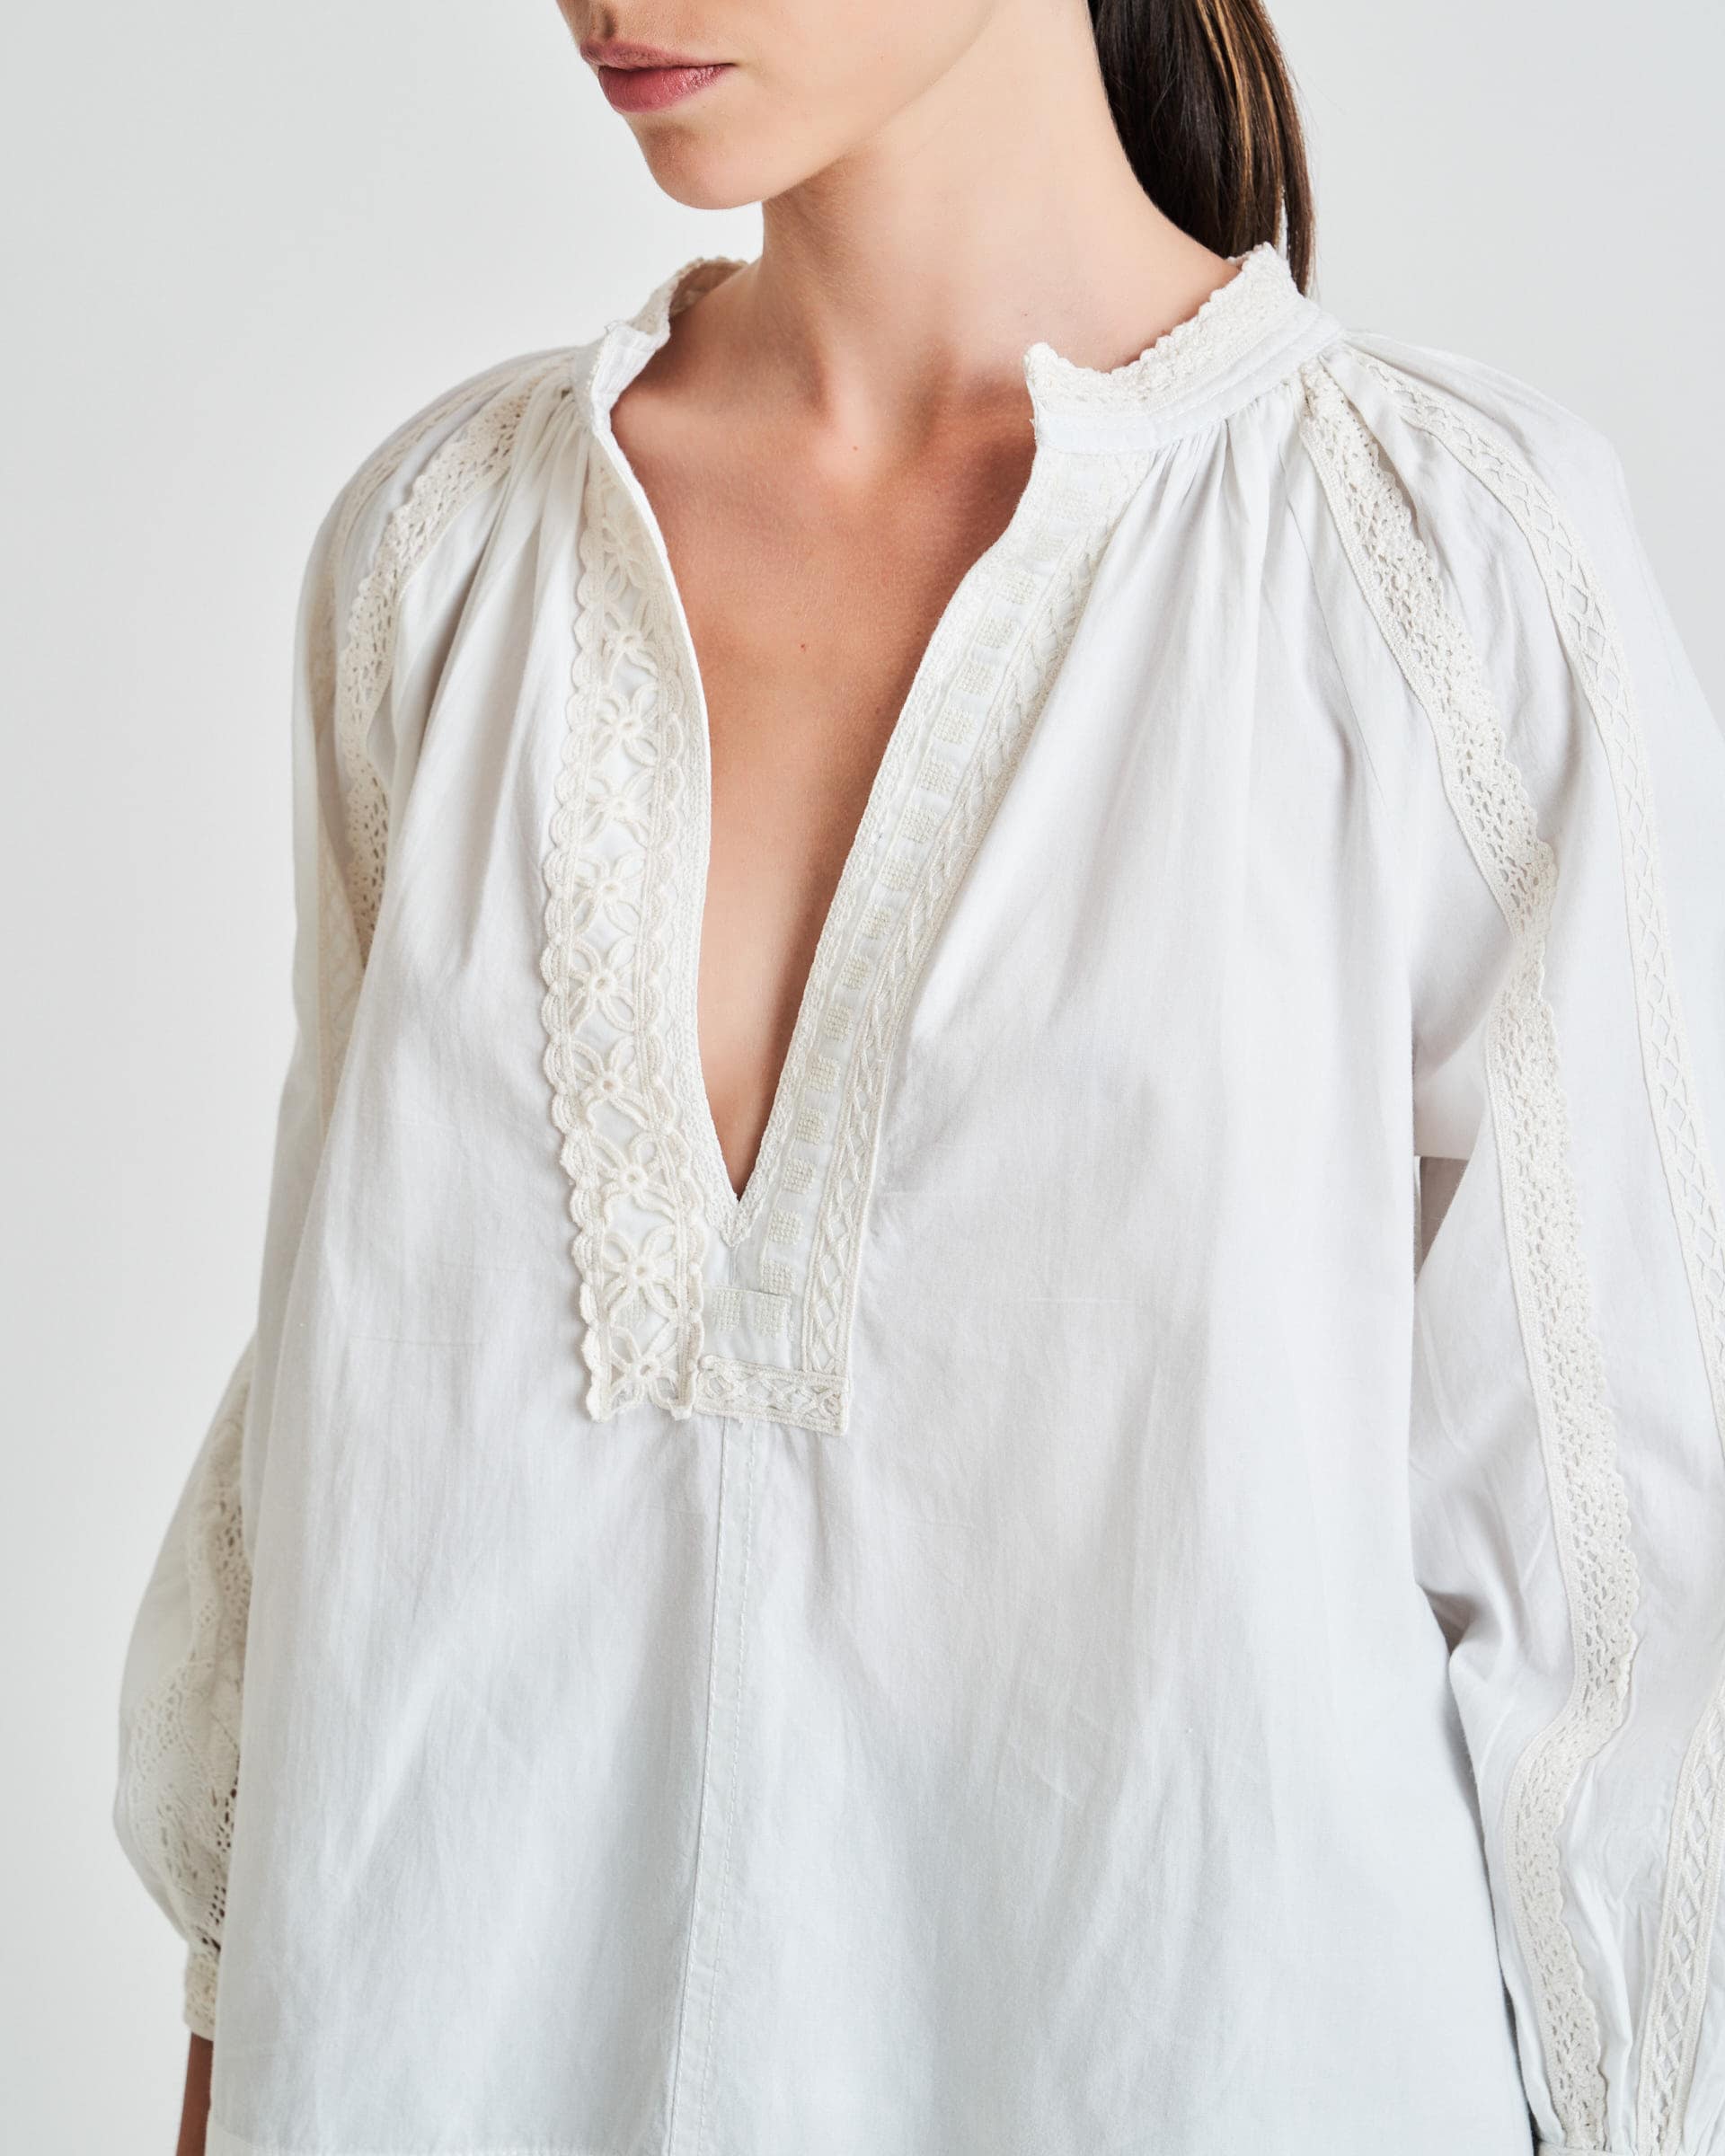 The Market Store | Embroidered Blouse